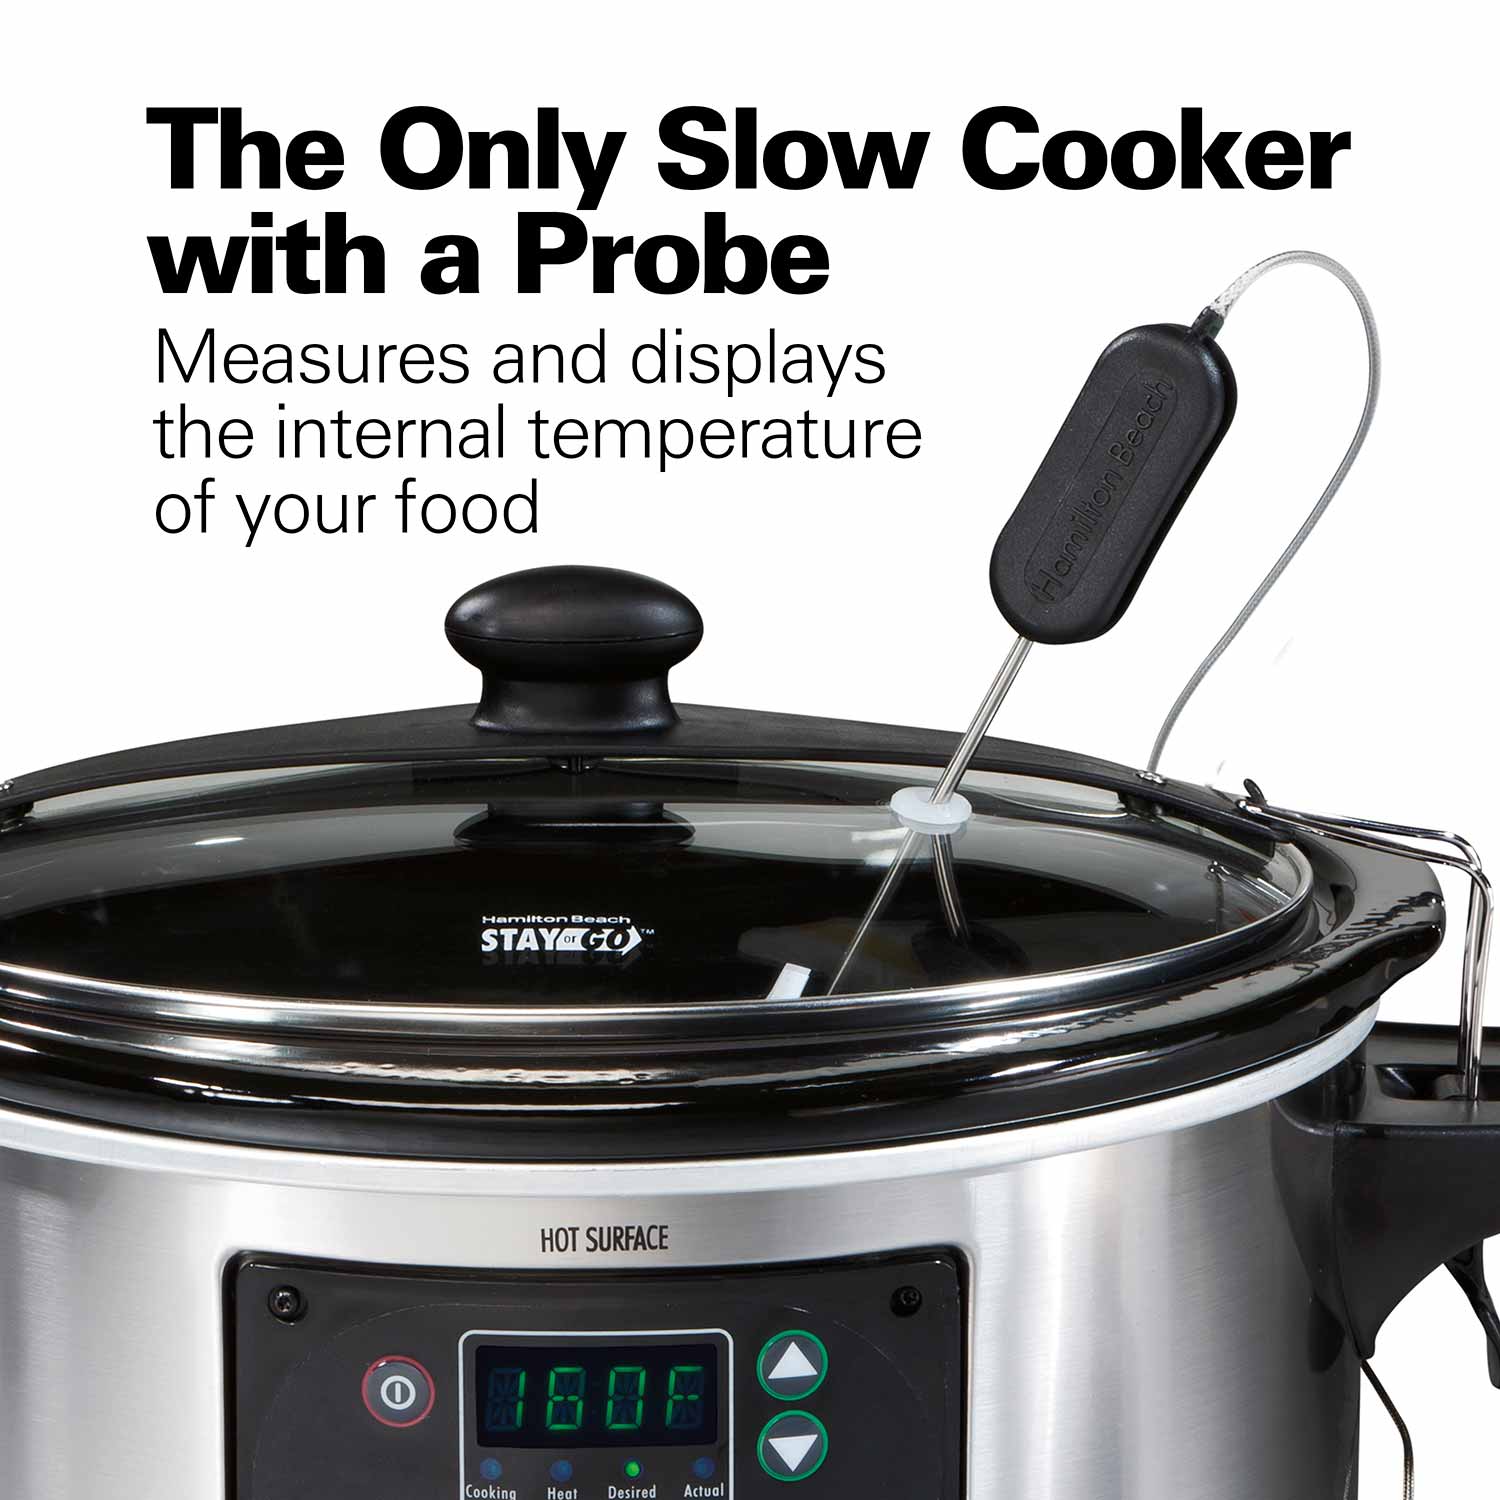 6 qt Stainless Steel Set & Forget Programmable Slow Cooker w/Spoon/Lid by  Hamilton Beach at Fleet Farm